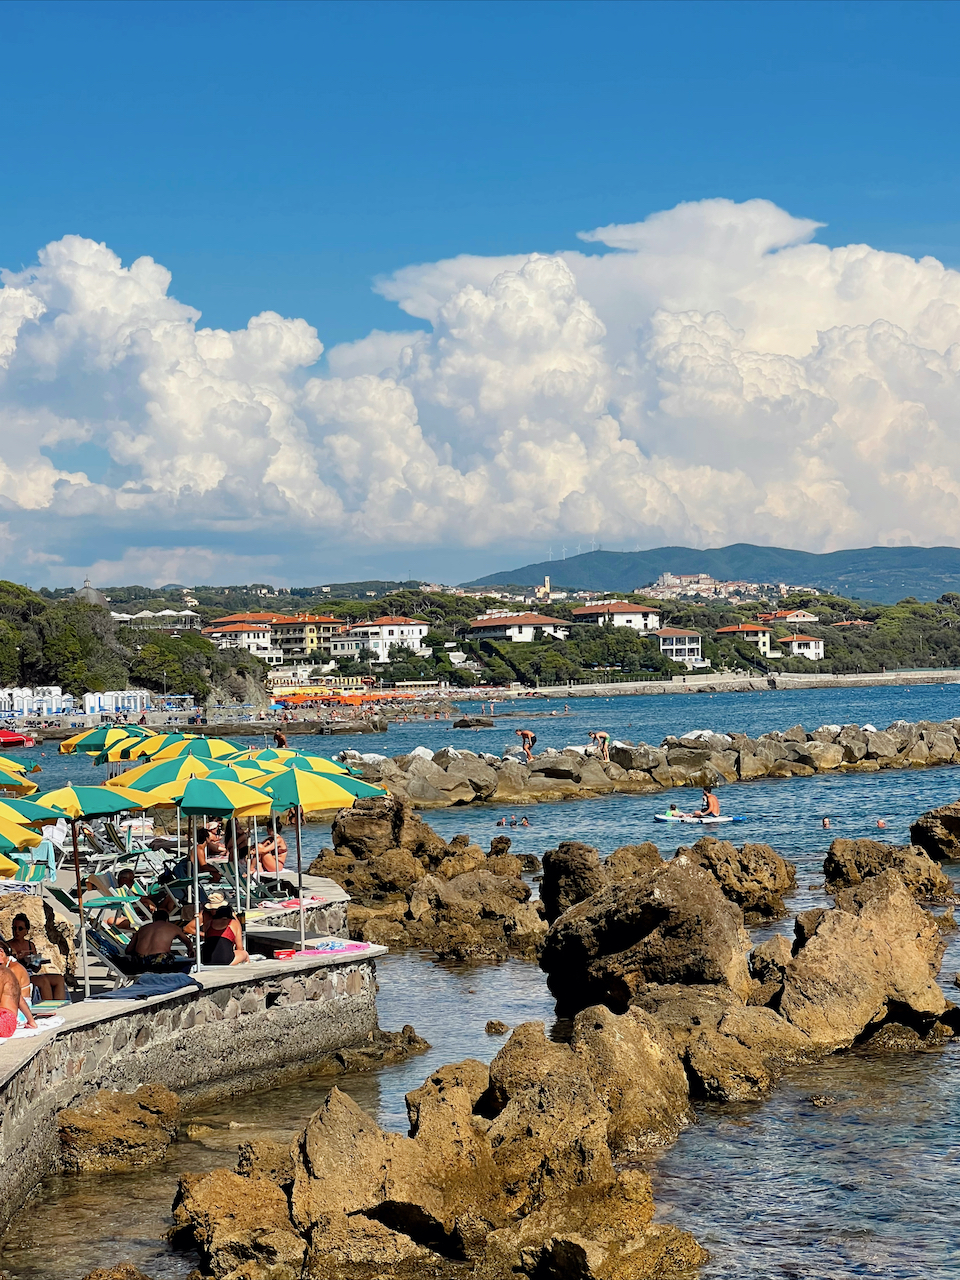 The Best Beach Day Trip From Florence -Castiglioncello